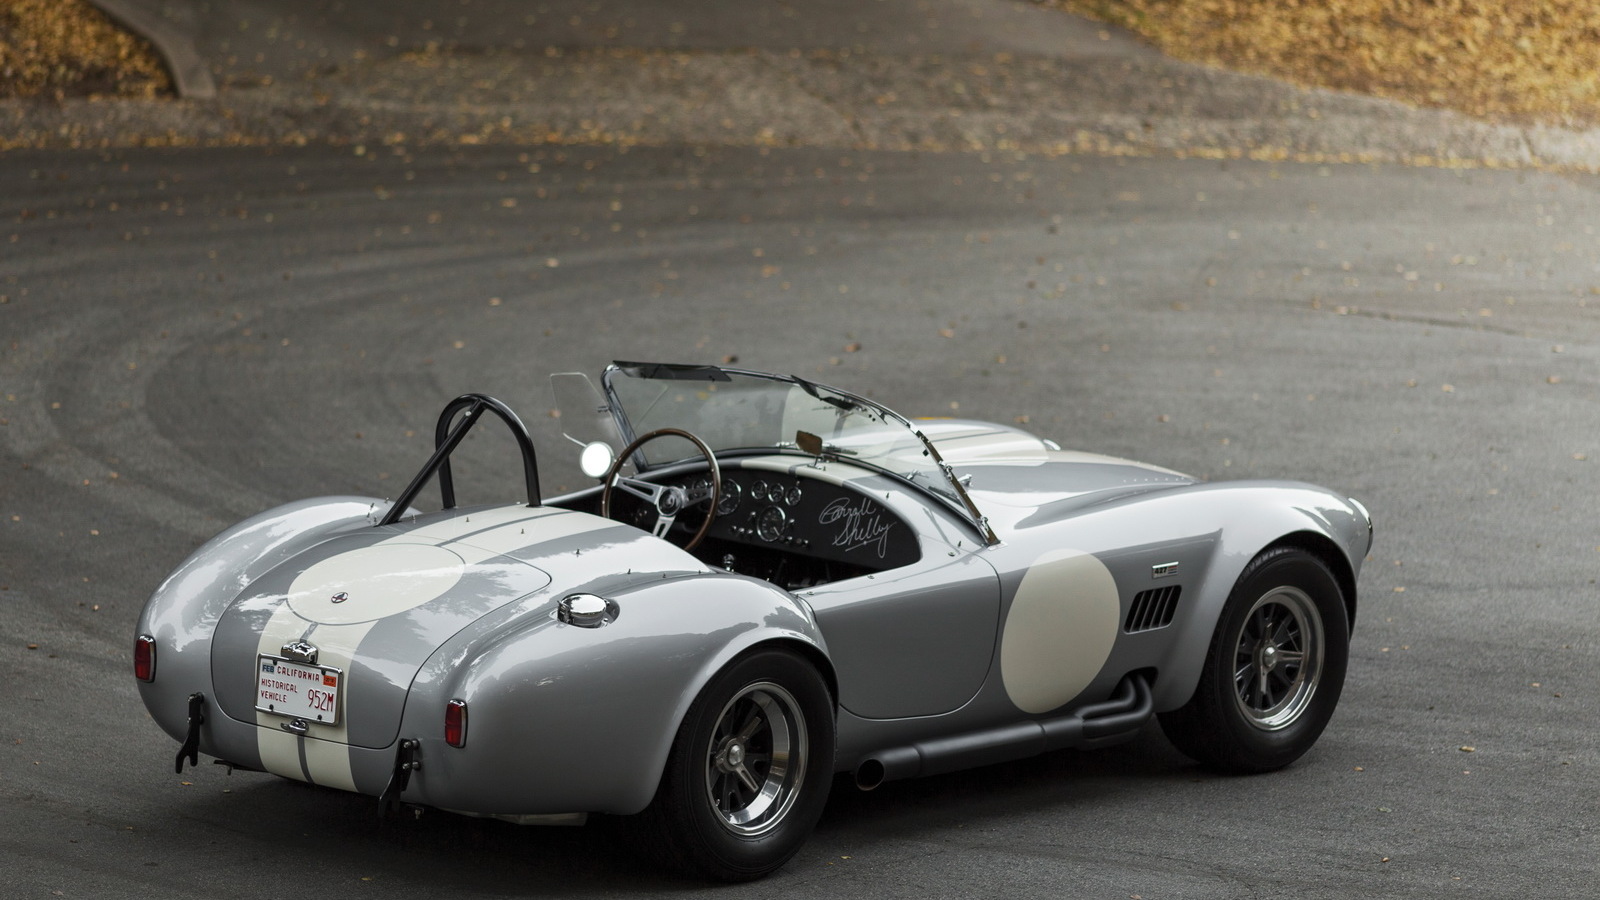 This Original Shelby Cobra 427 Should Fetch Millions At Auction